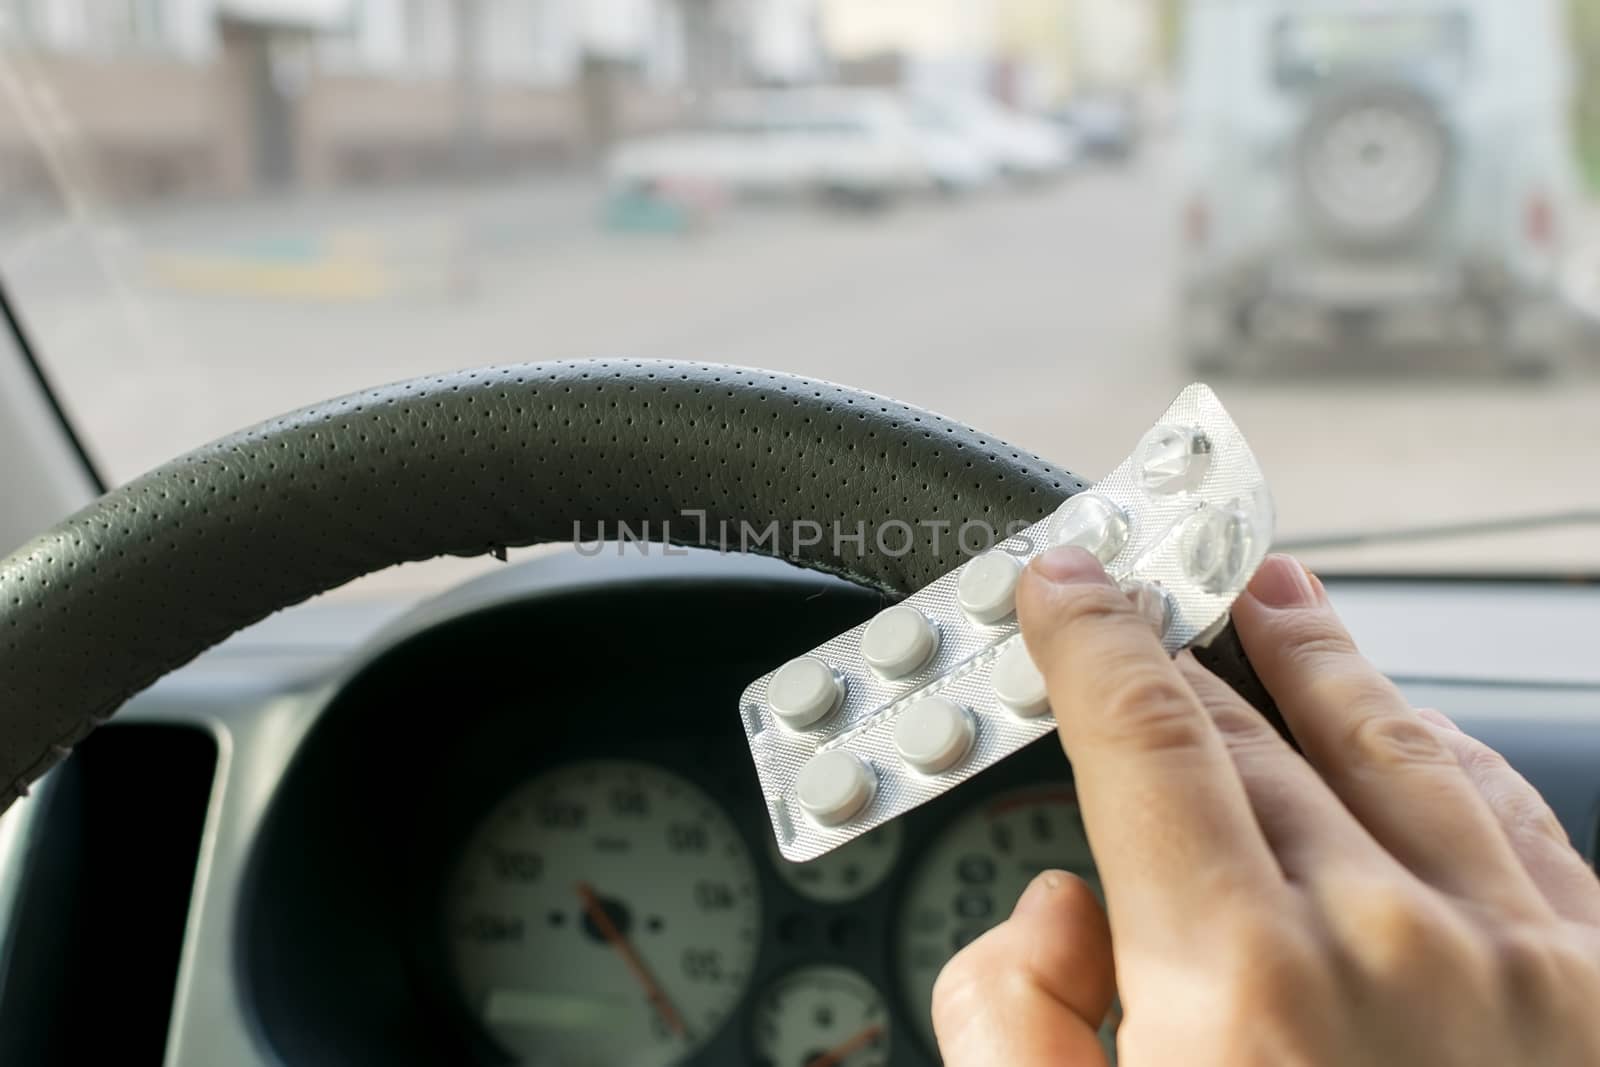 View of the driver's hand on the background of the steering wheel of the car, which holds a package of pills